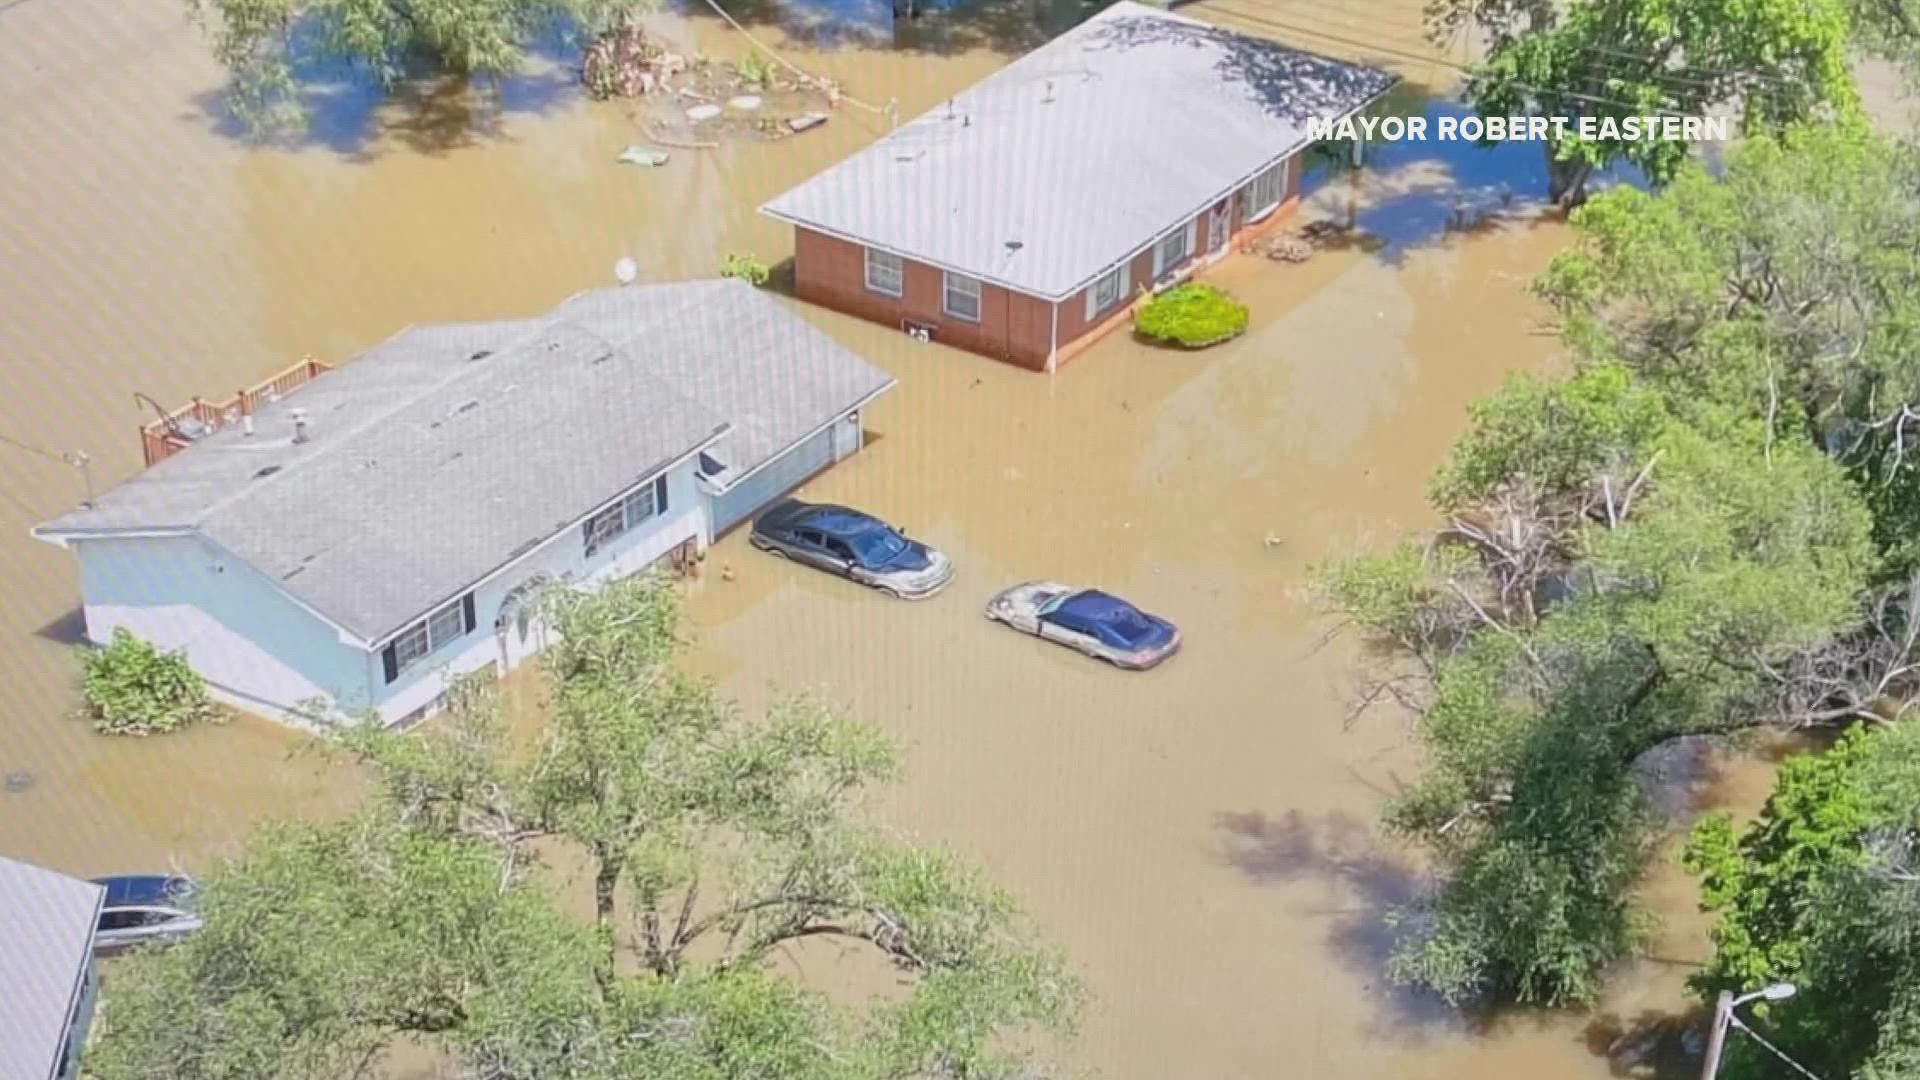 A Federal Emergency Management Agency spokesperson said all requests for aid will be thoroughly reviewed, but they can't say how long the process will take.